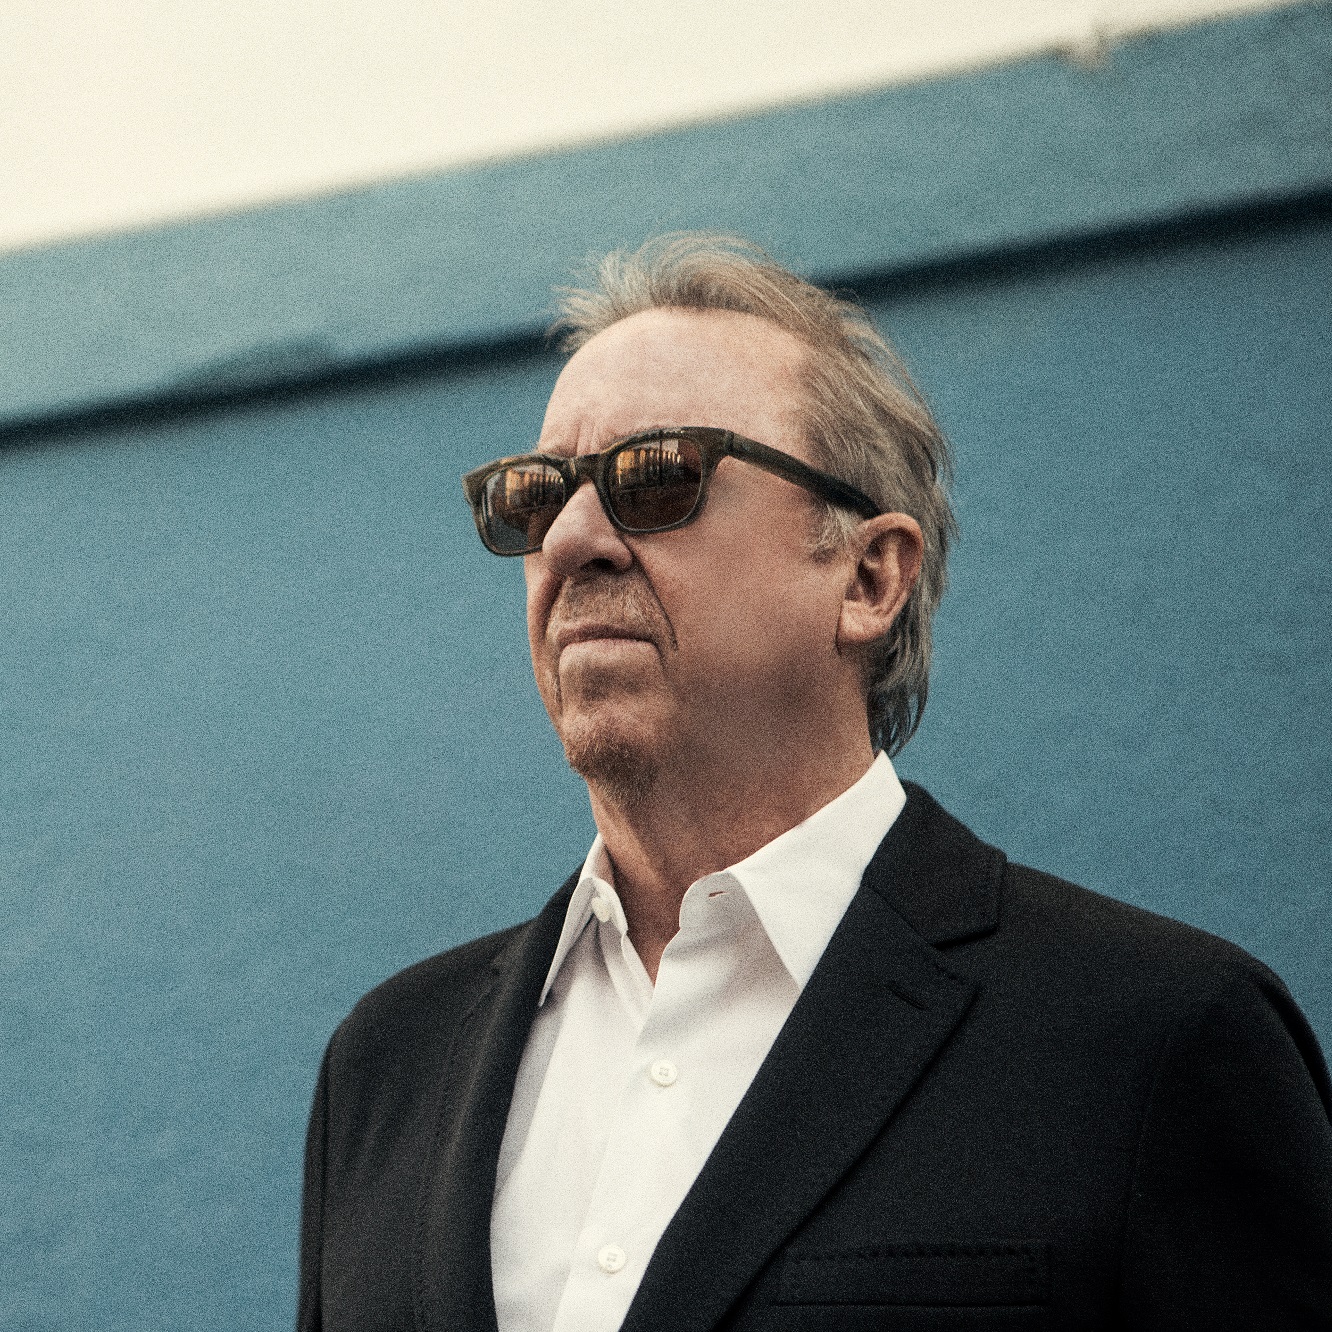 Boz Scaggs with Special Guest The Robert Cray Band